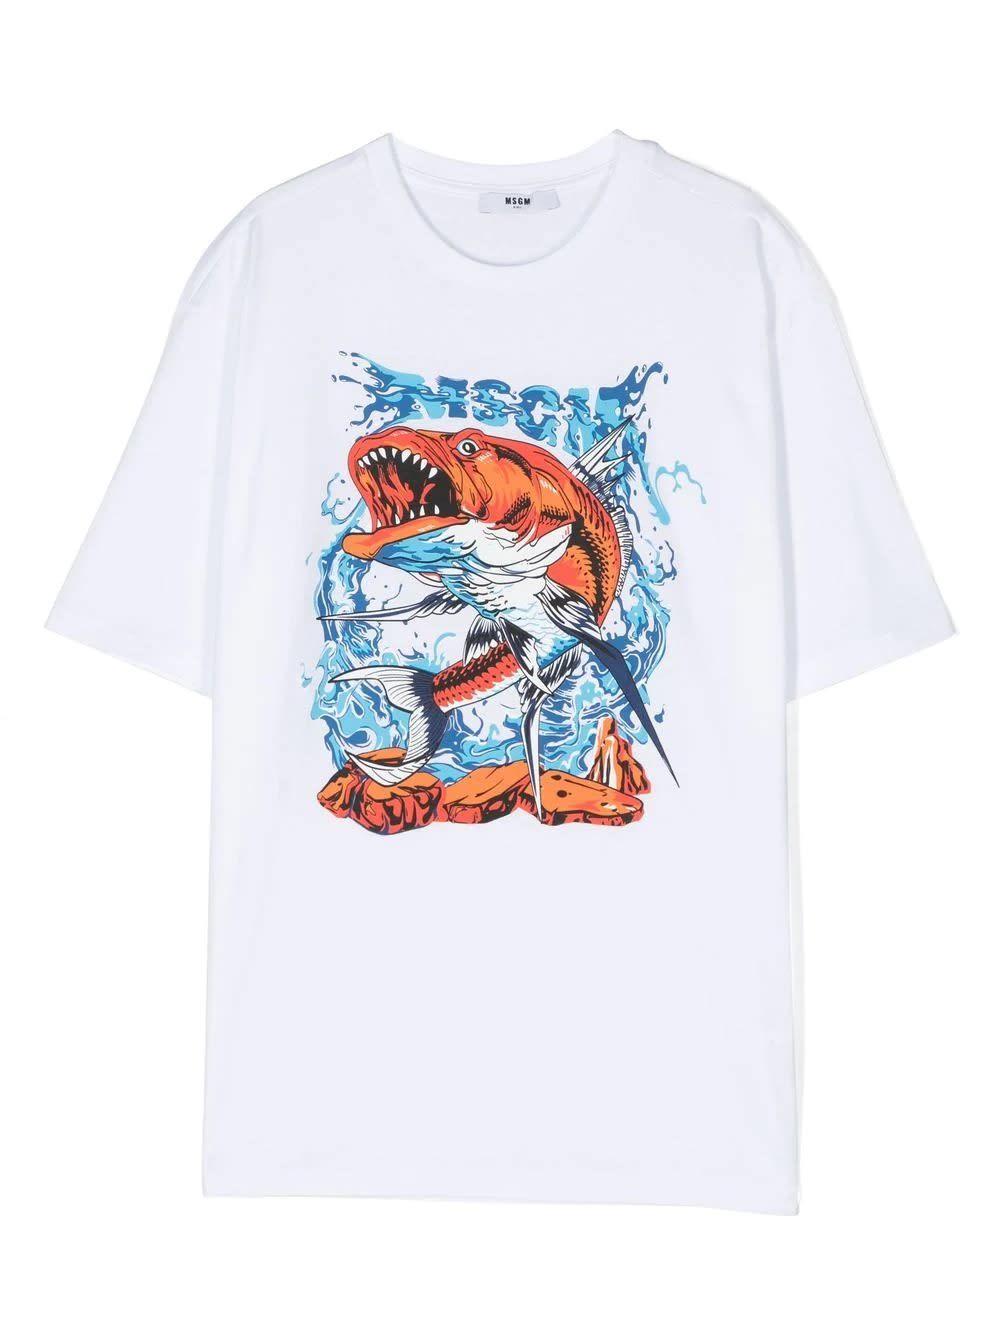 MSGM WHITE T-SHIRT WITH GRAPHIC PRINT